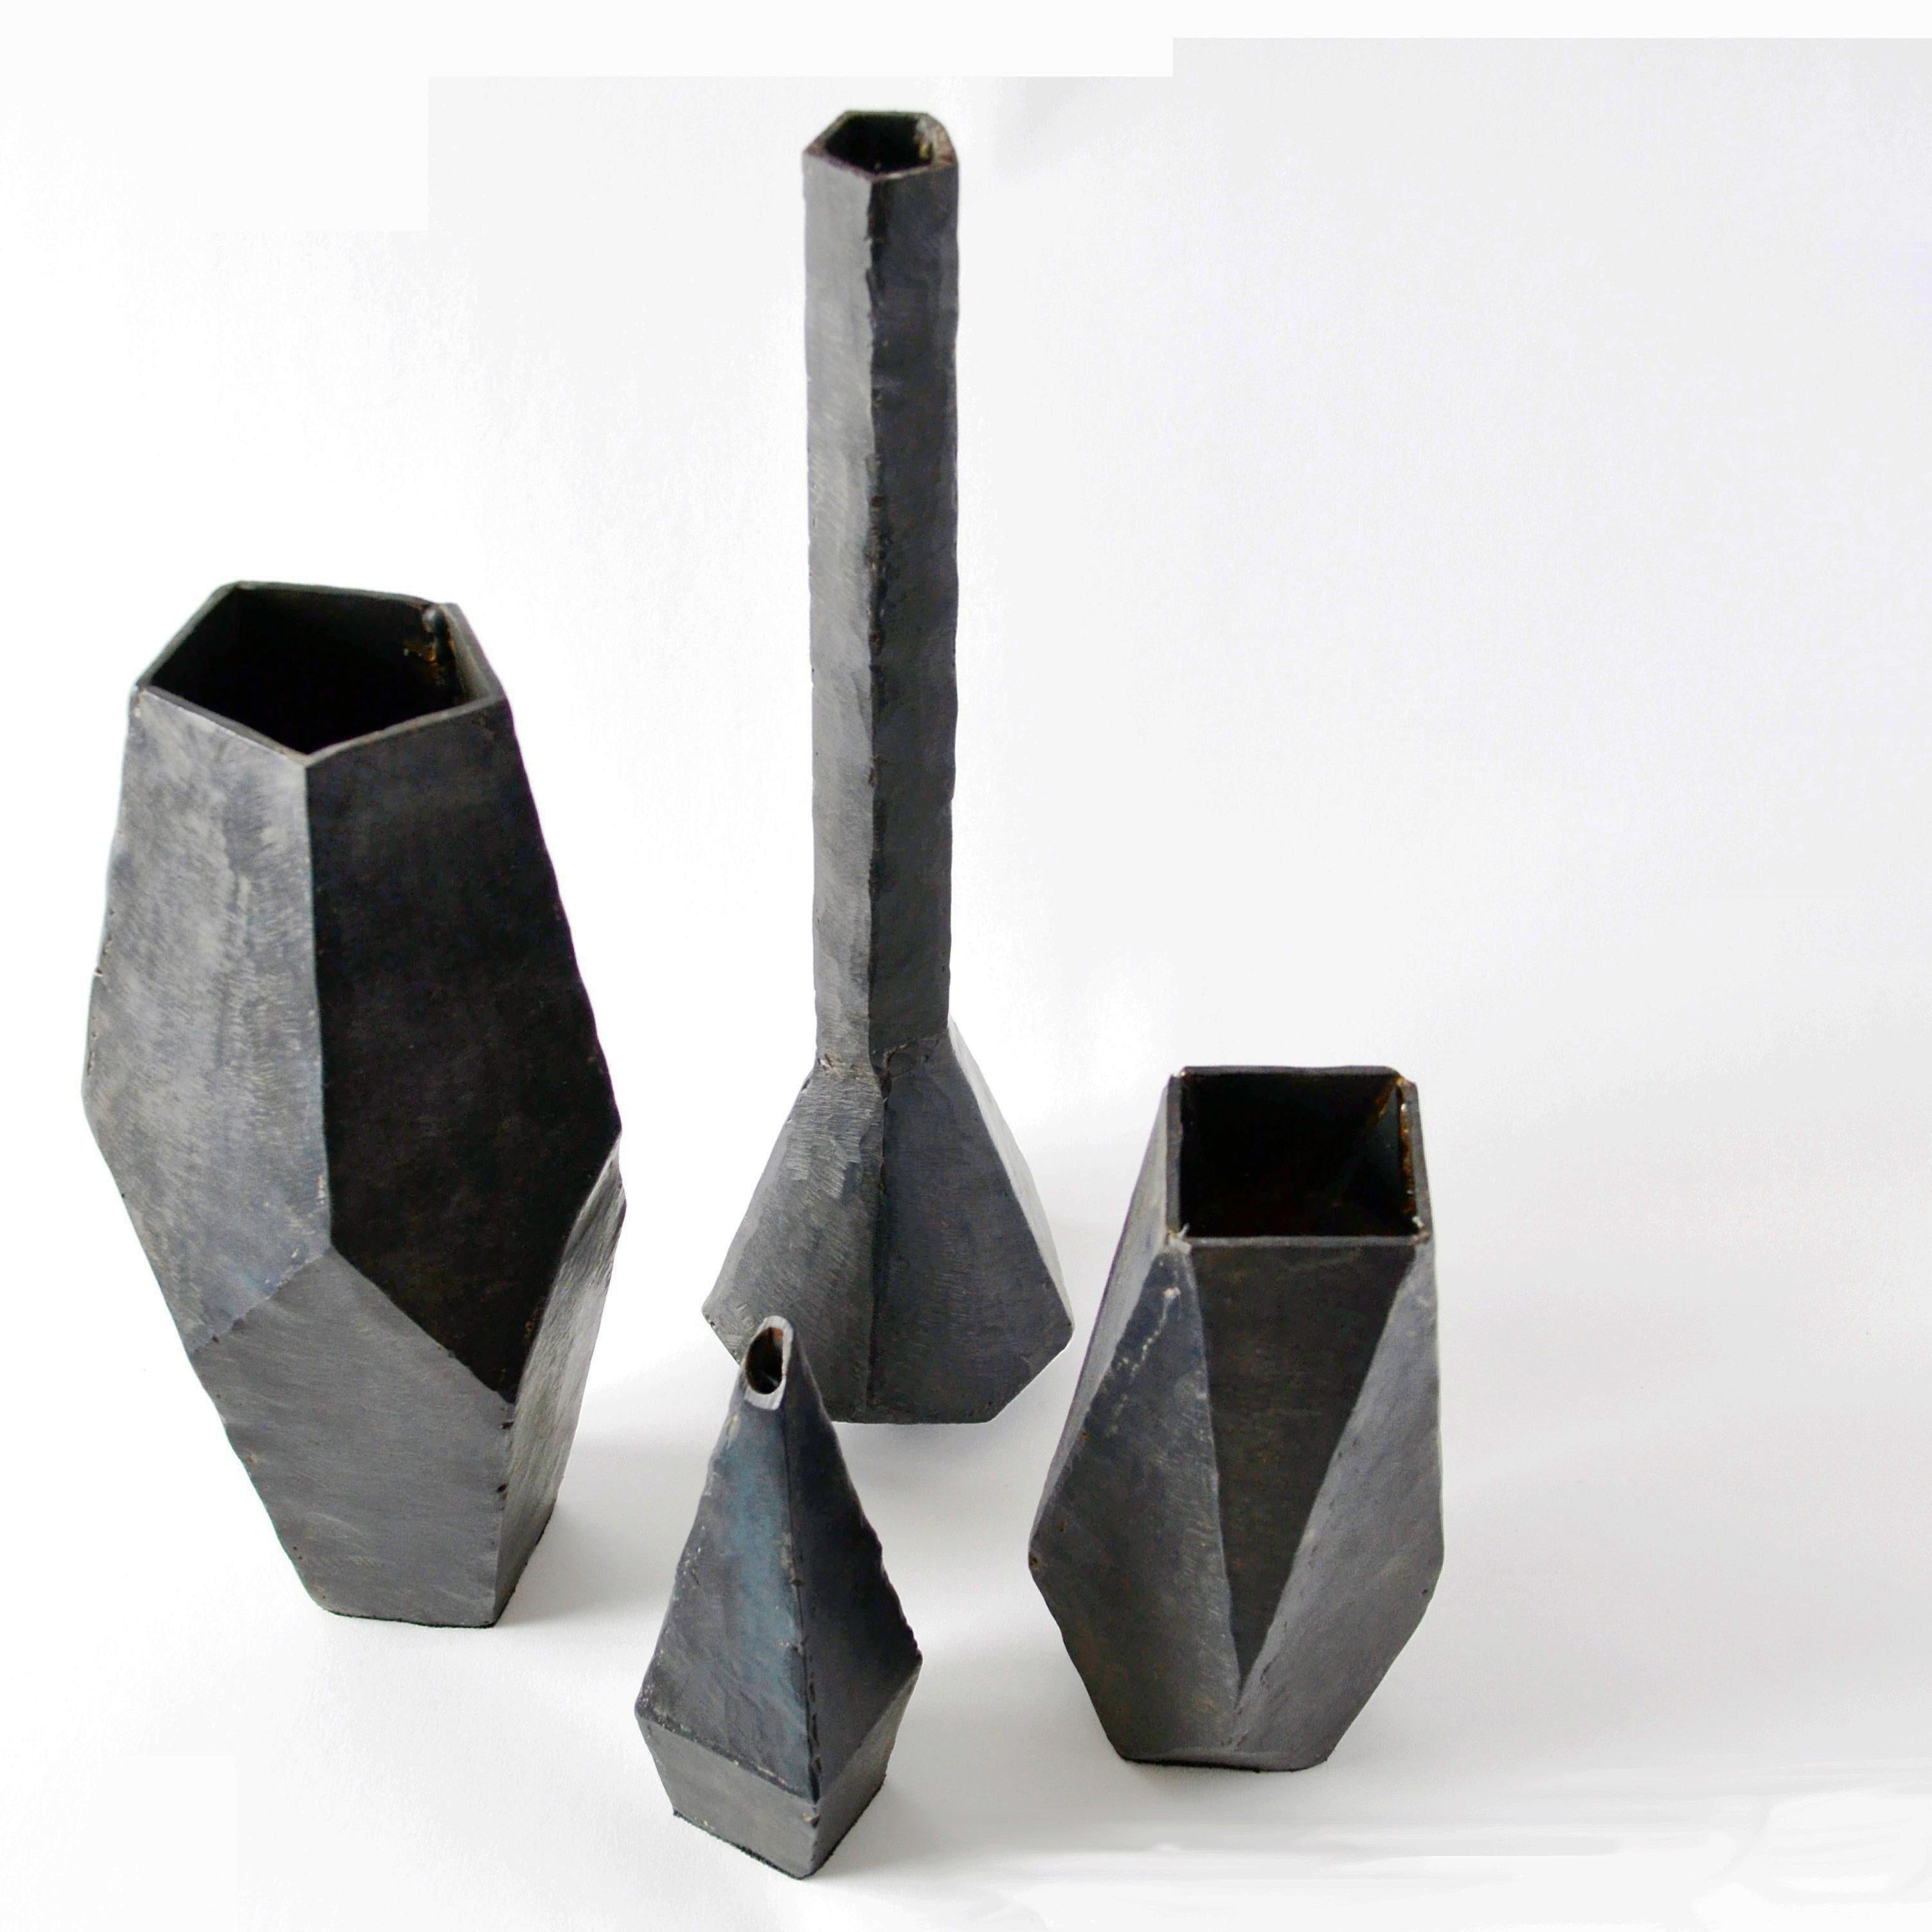 Carved Geometric Vessel Sculpture Handmade Blackened and Waxed Iron For Sale